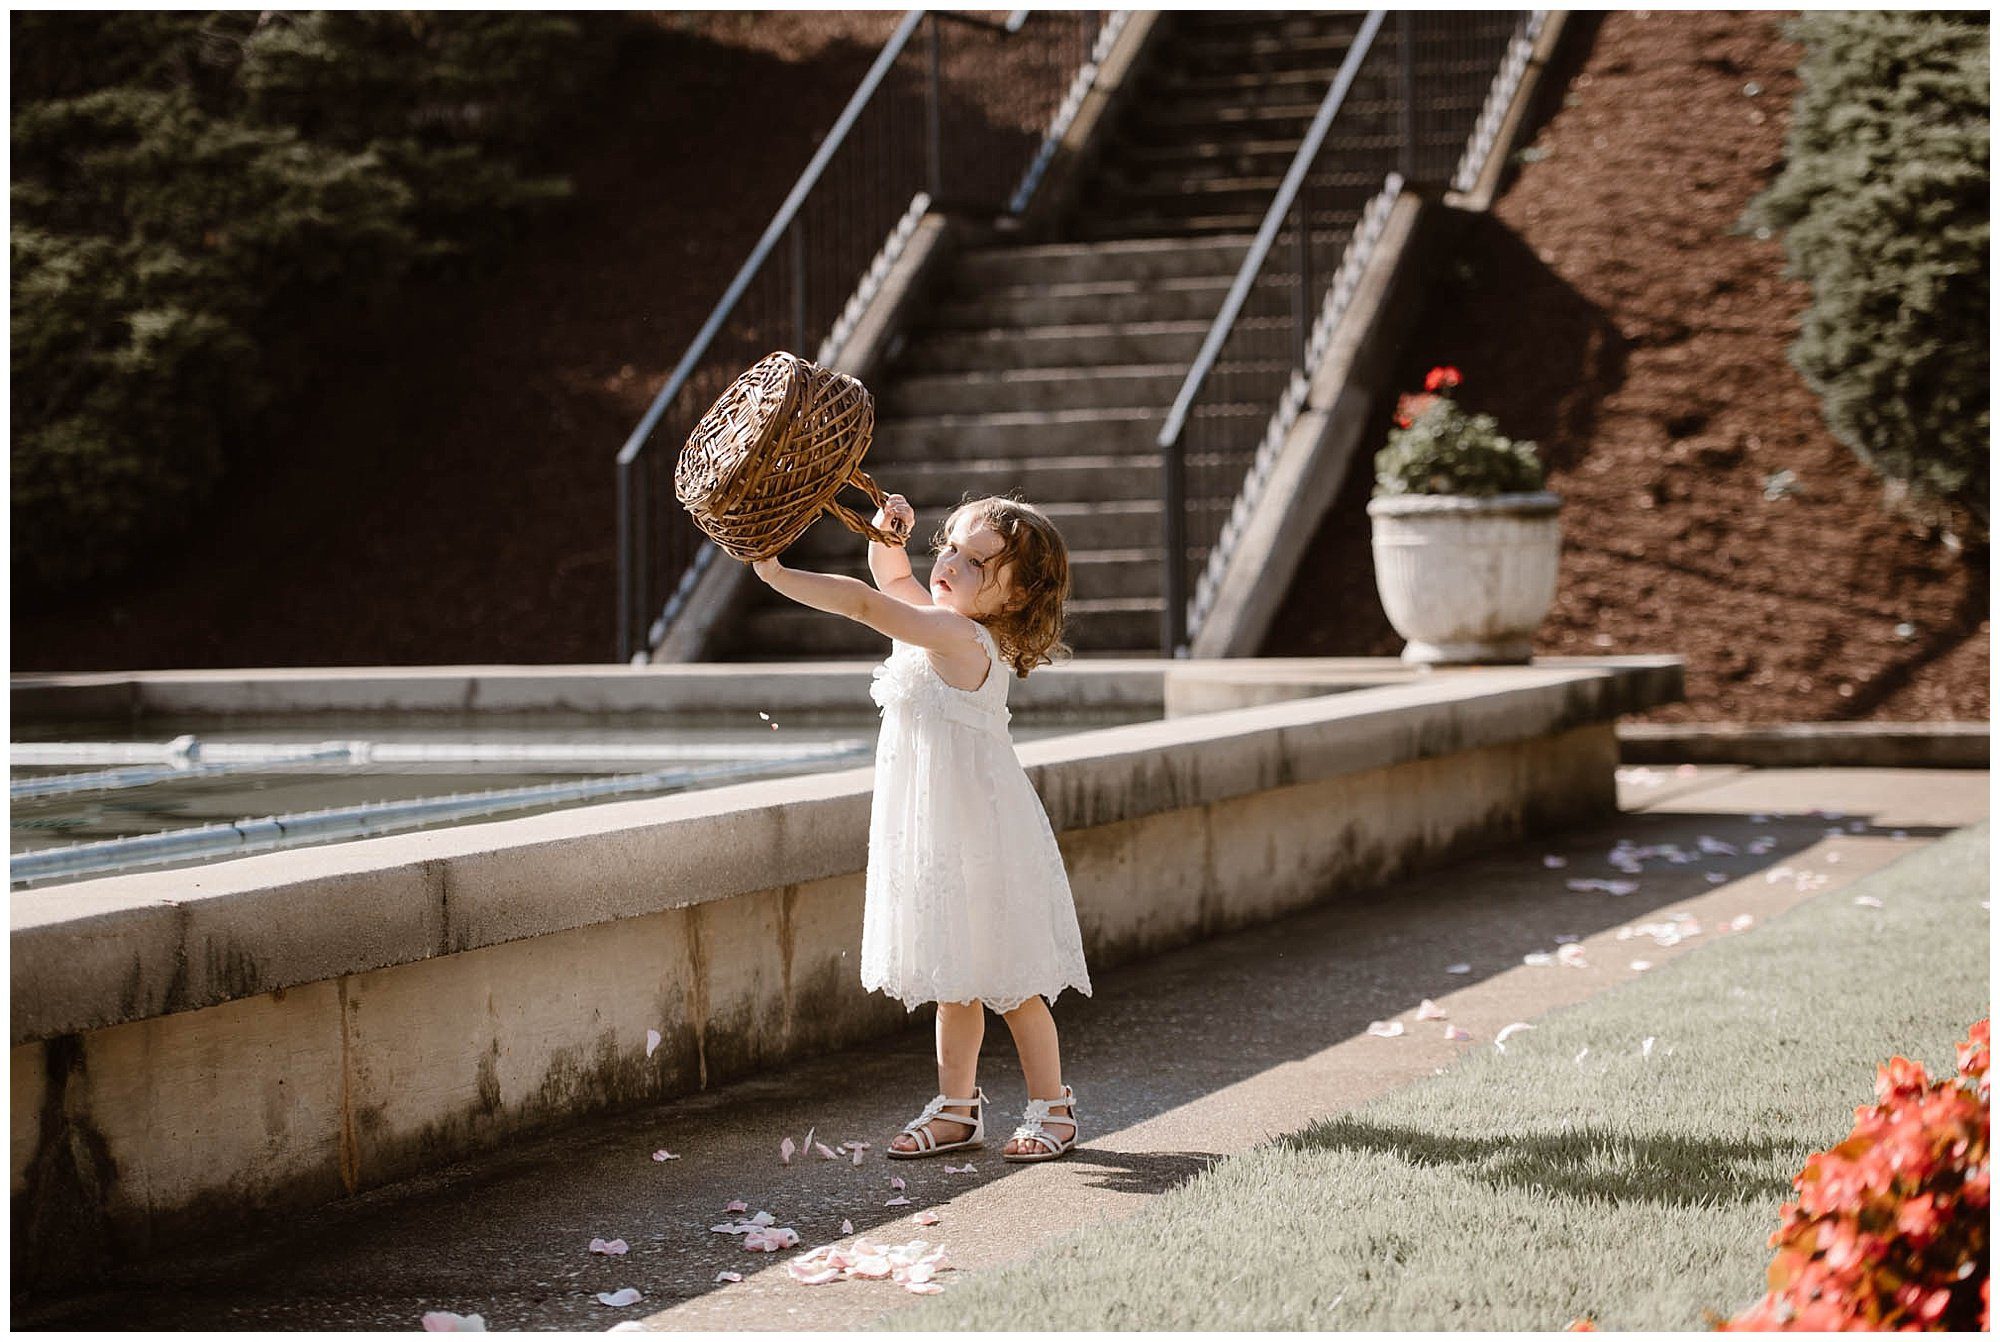 Flower girl at Crescent Bend House Wedding Knoxville